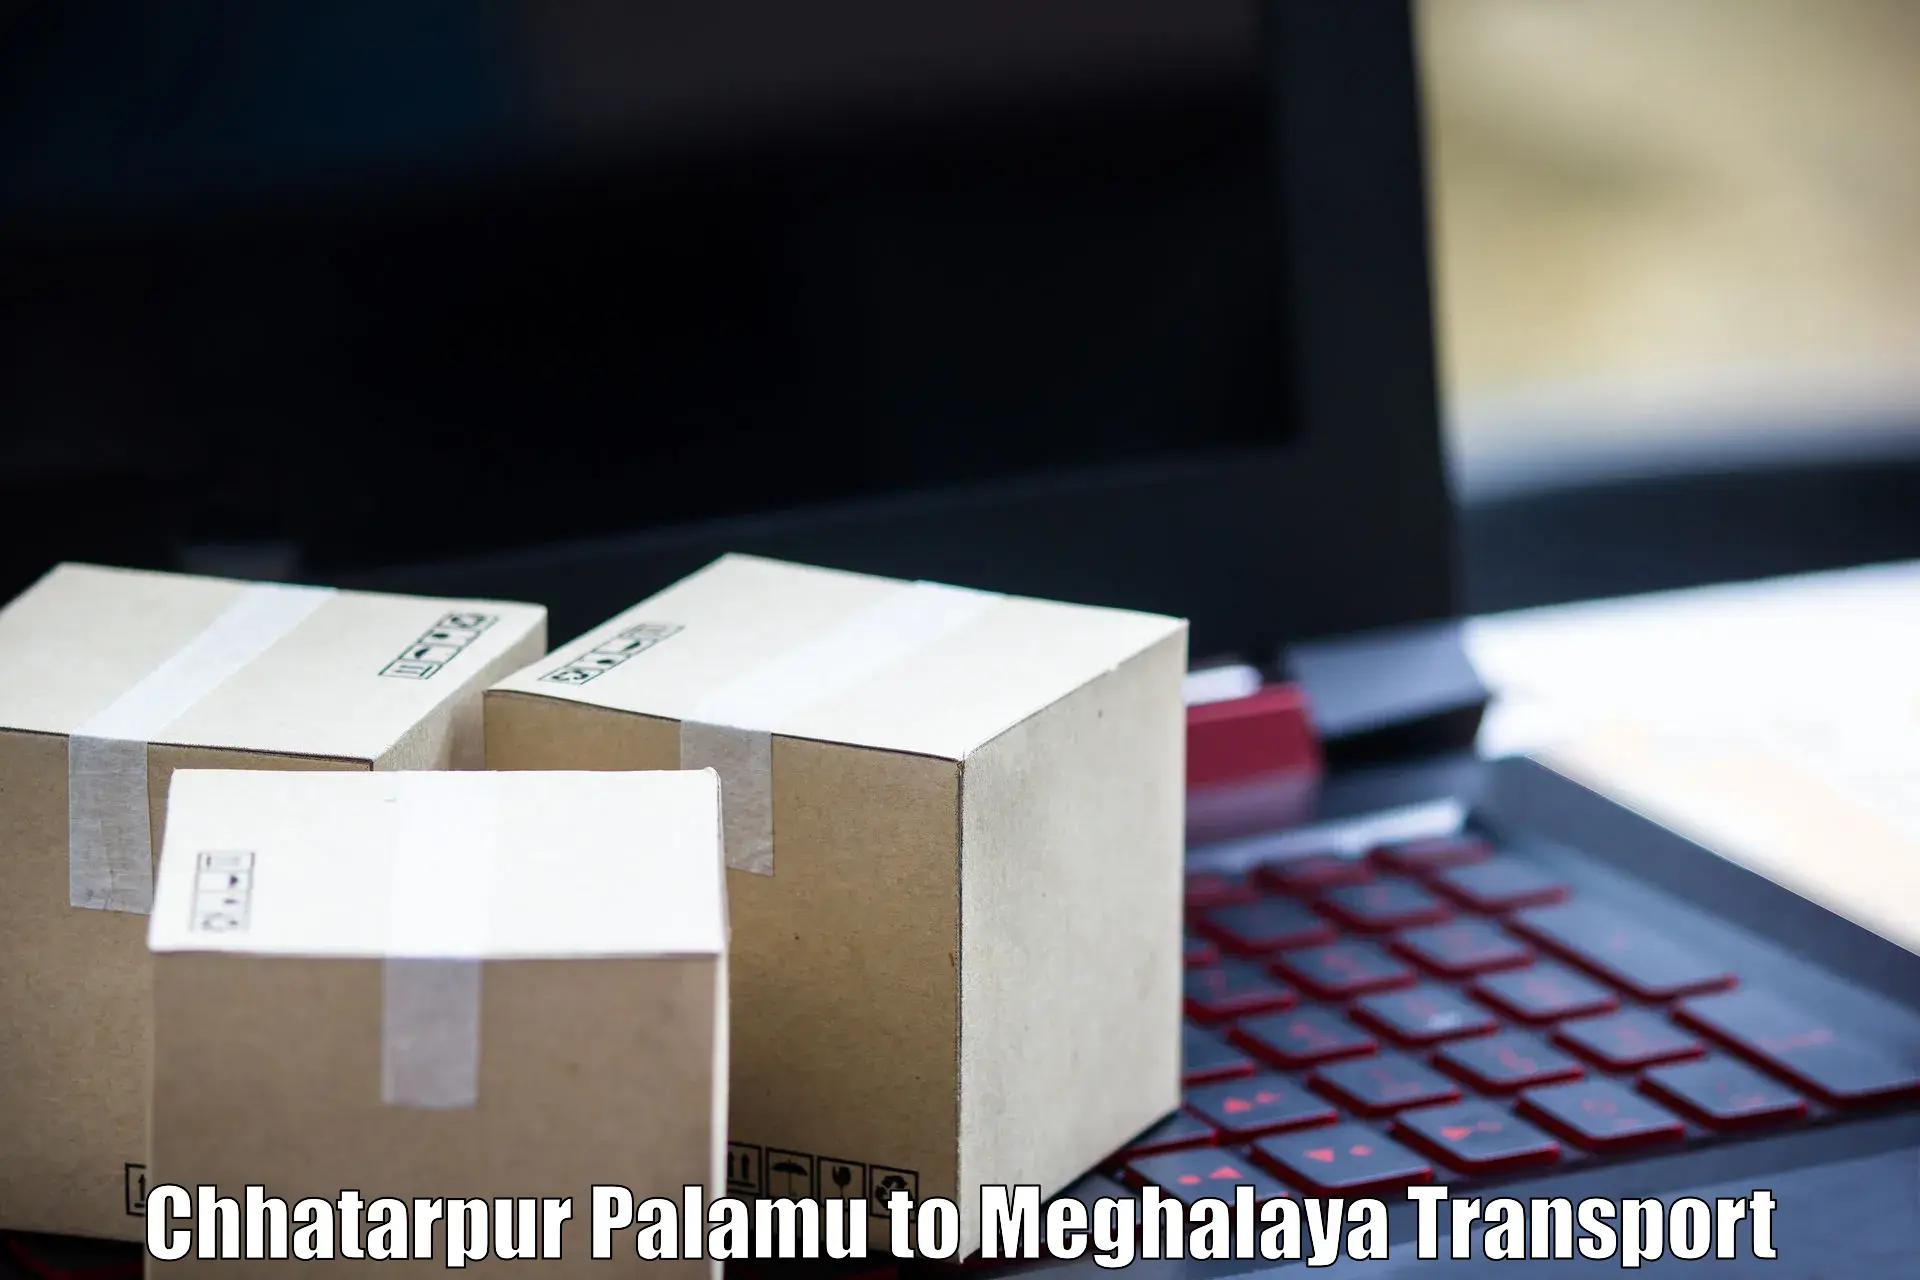 Package delivery services Chhatarpur Palamu to Jaintia Hills